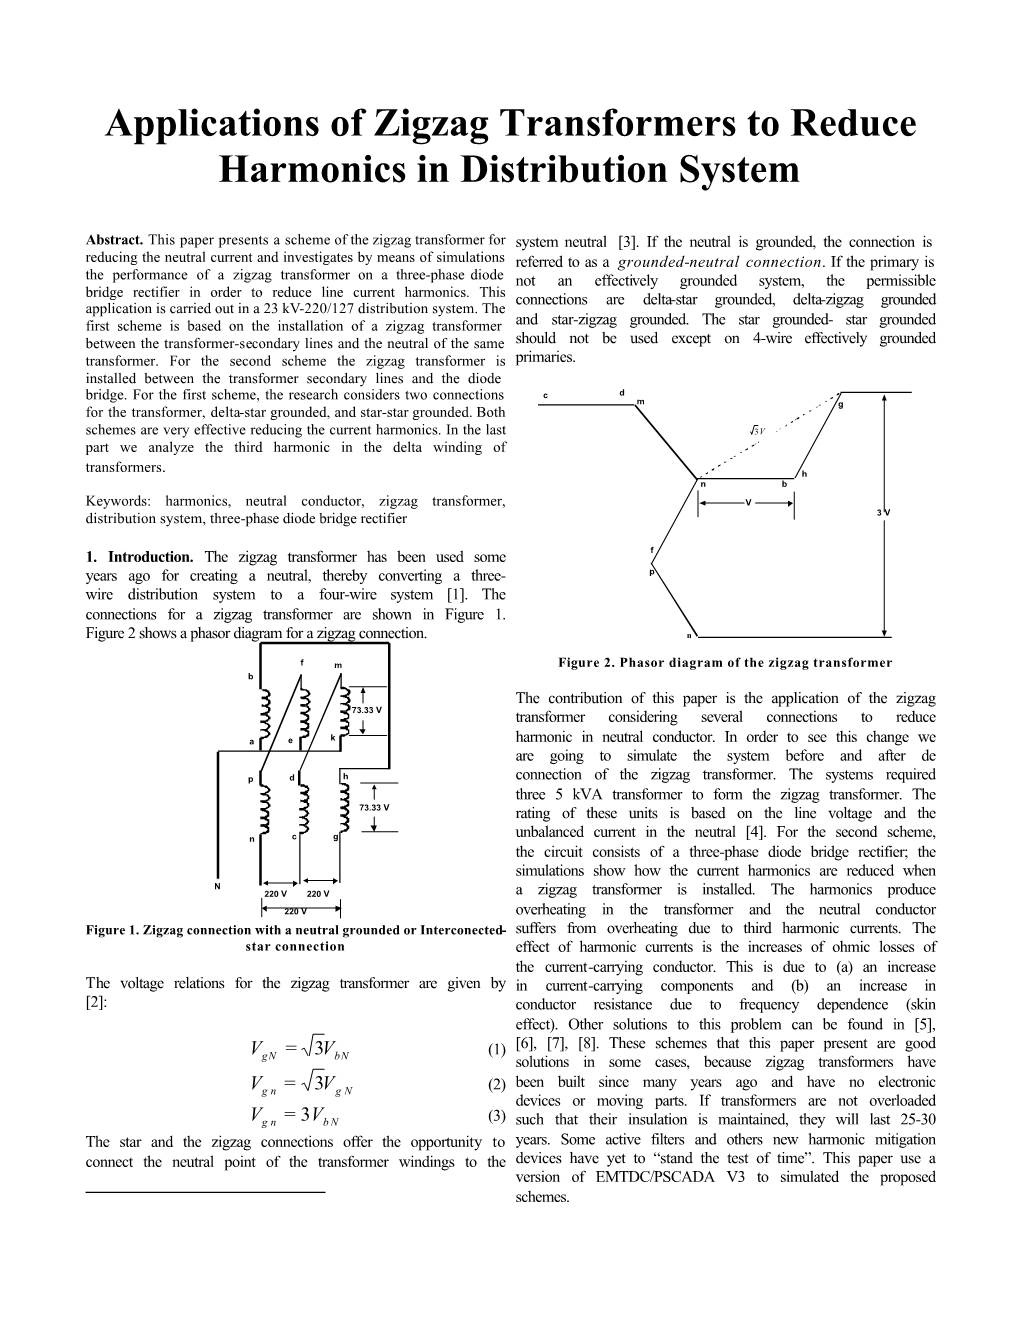 Applications of Zigzag Transformers to Reduce Harmonics in Distribution System